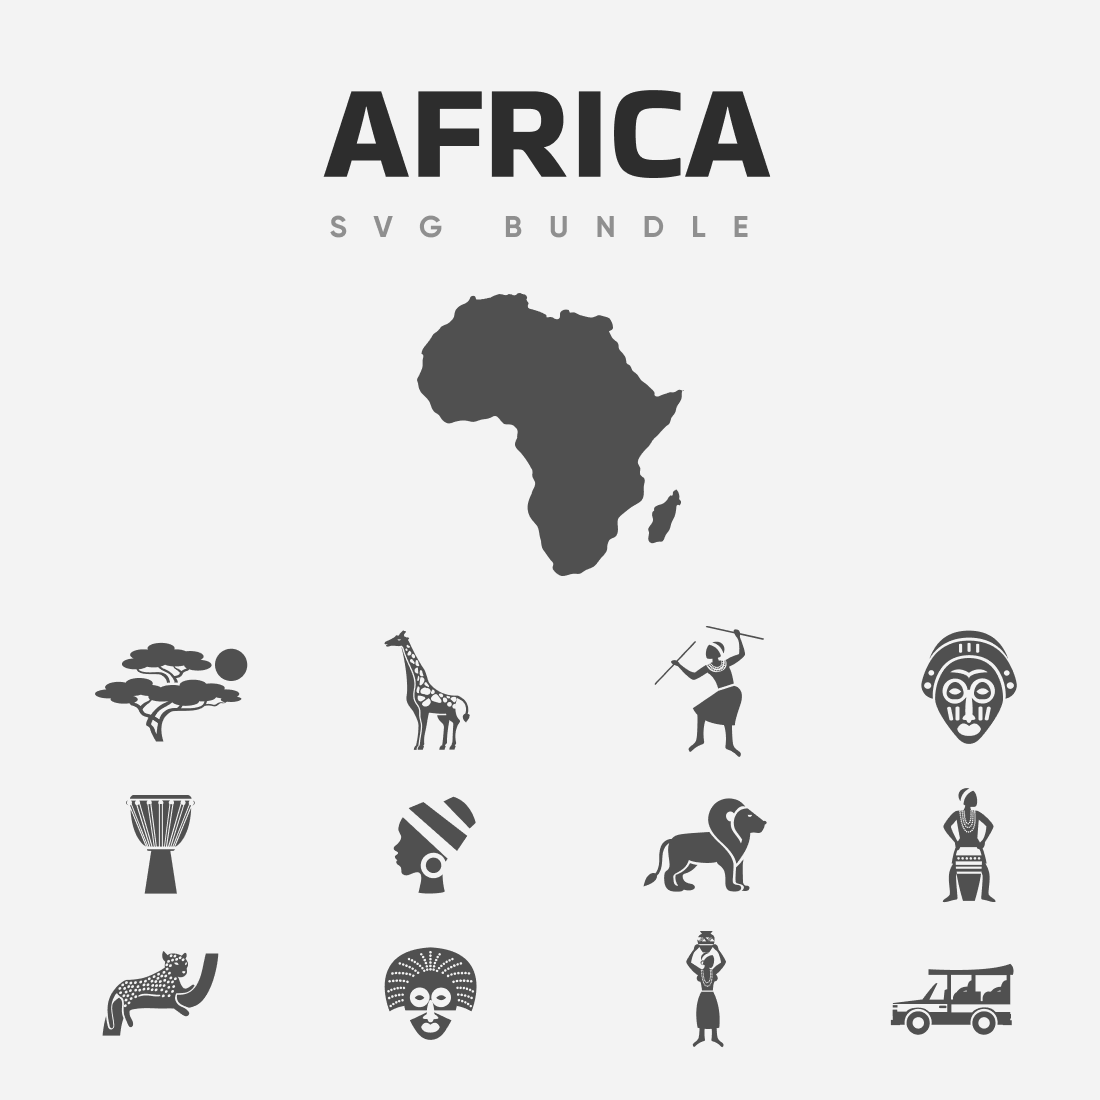 The continent of Africa is rich in wild animals, tourists, natives.